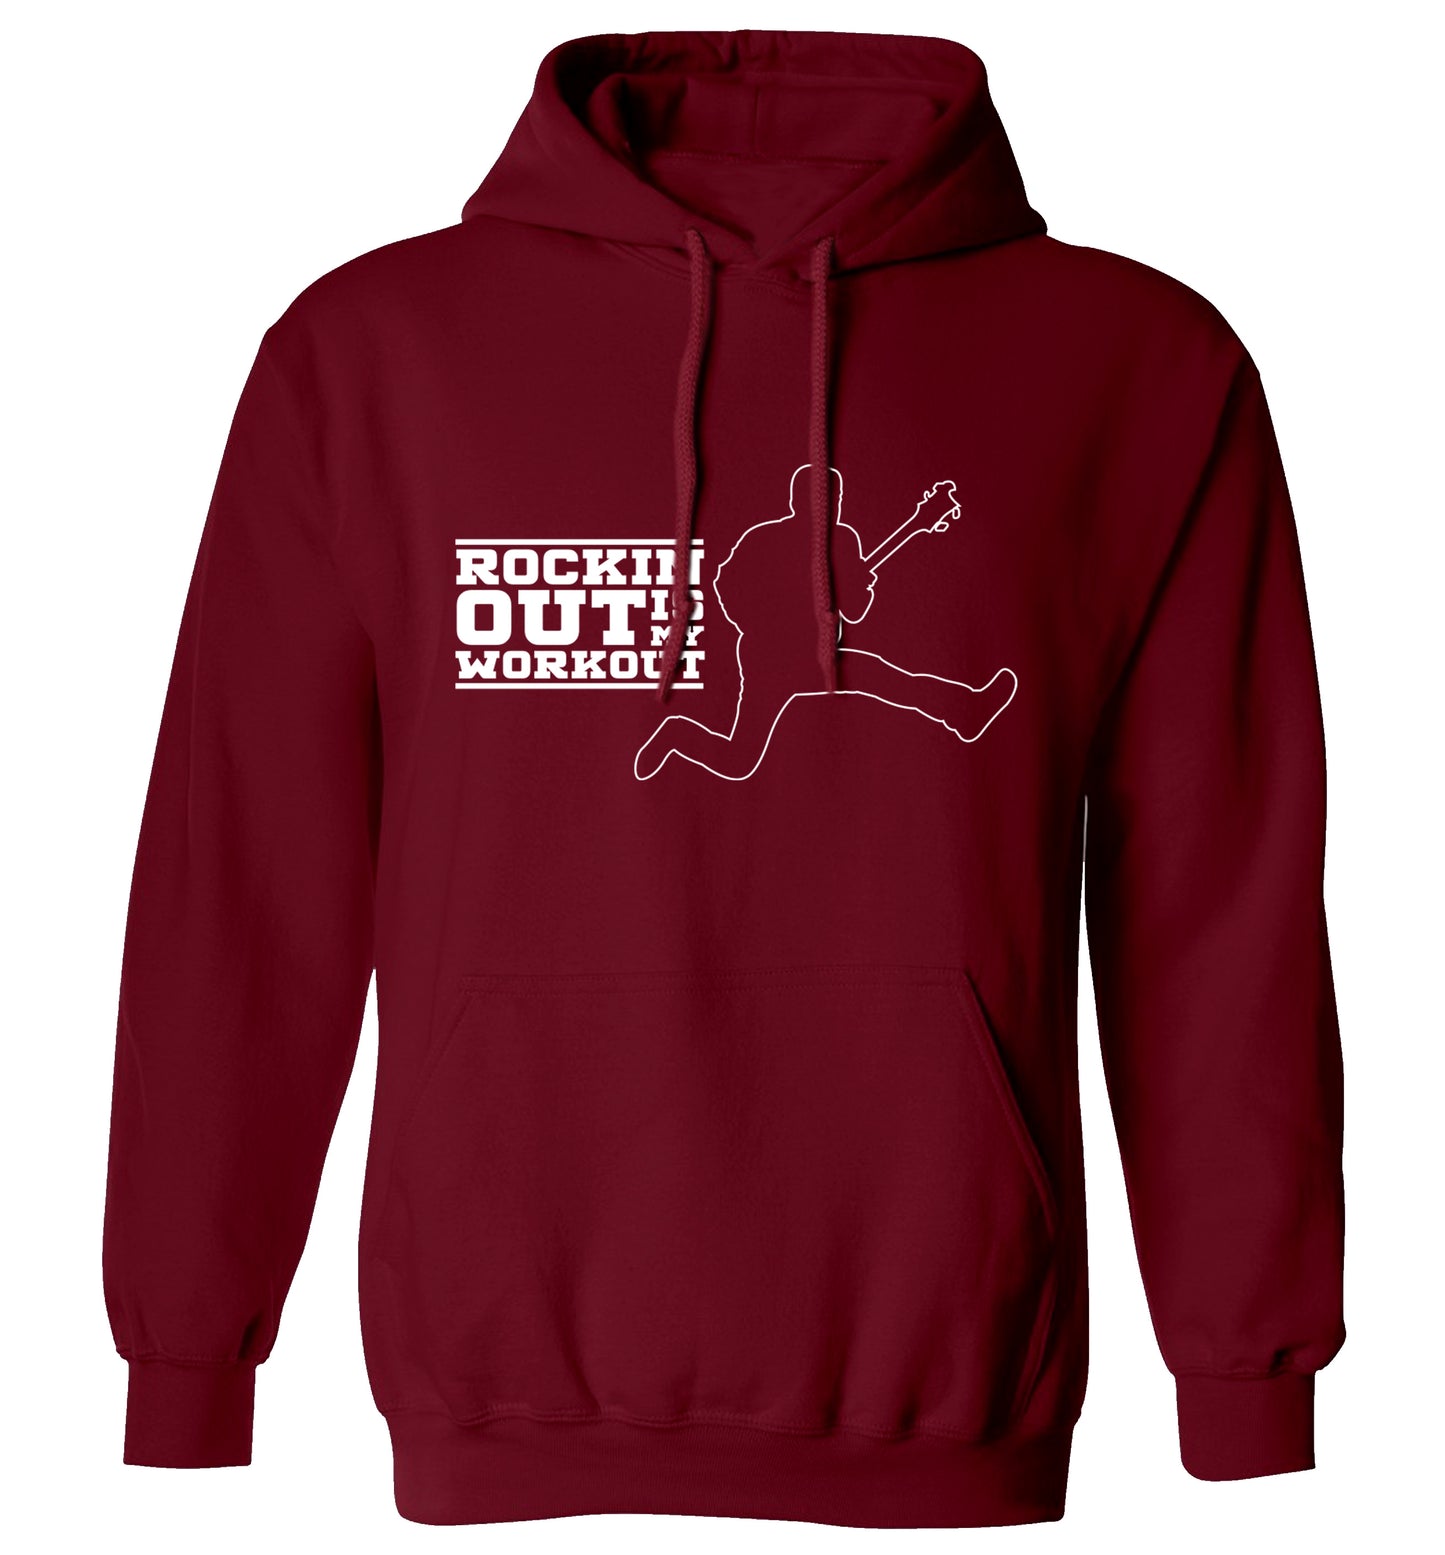 Rockin out is my workout adults unisex maroon hoodie 2XL